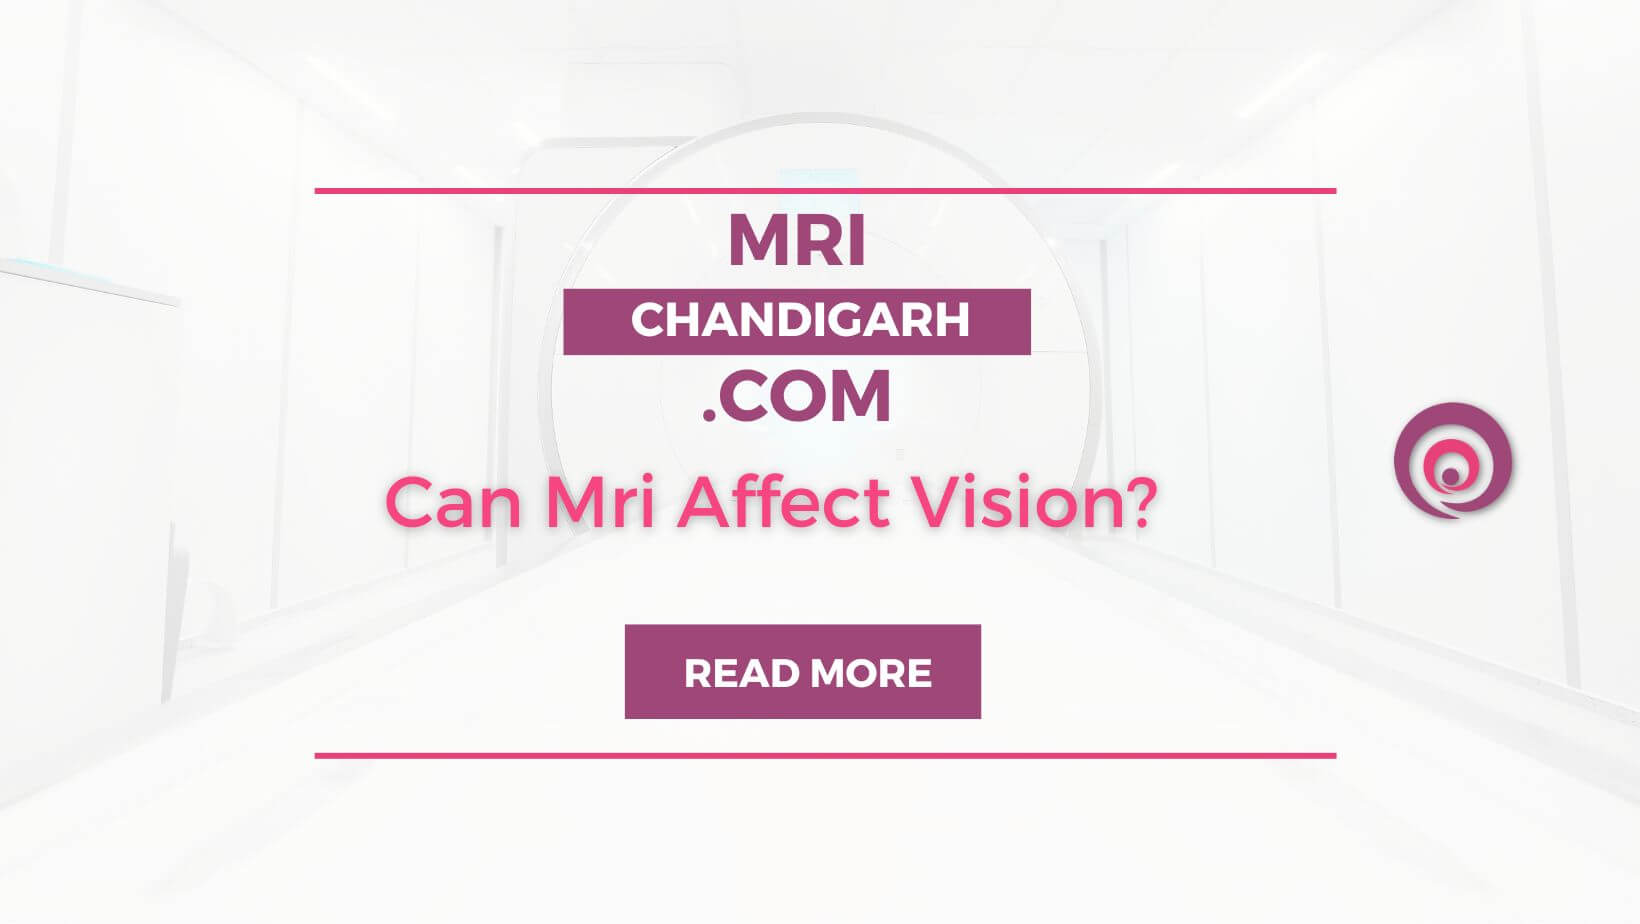 Can Mri Affect Vision?